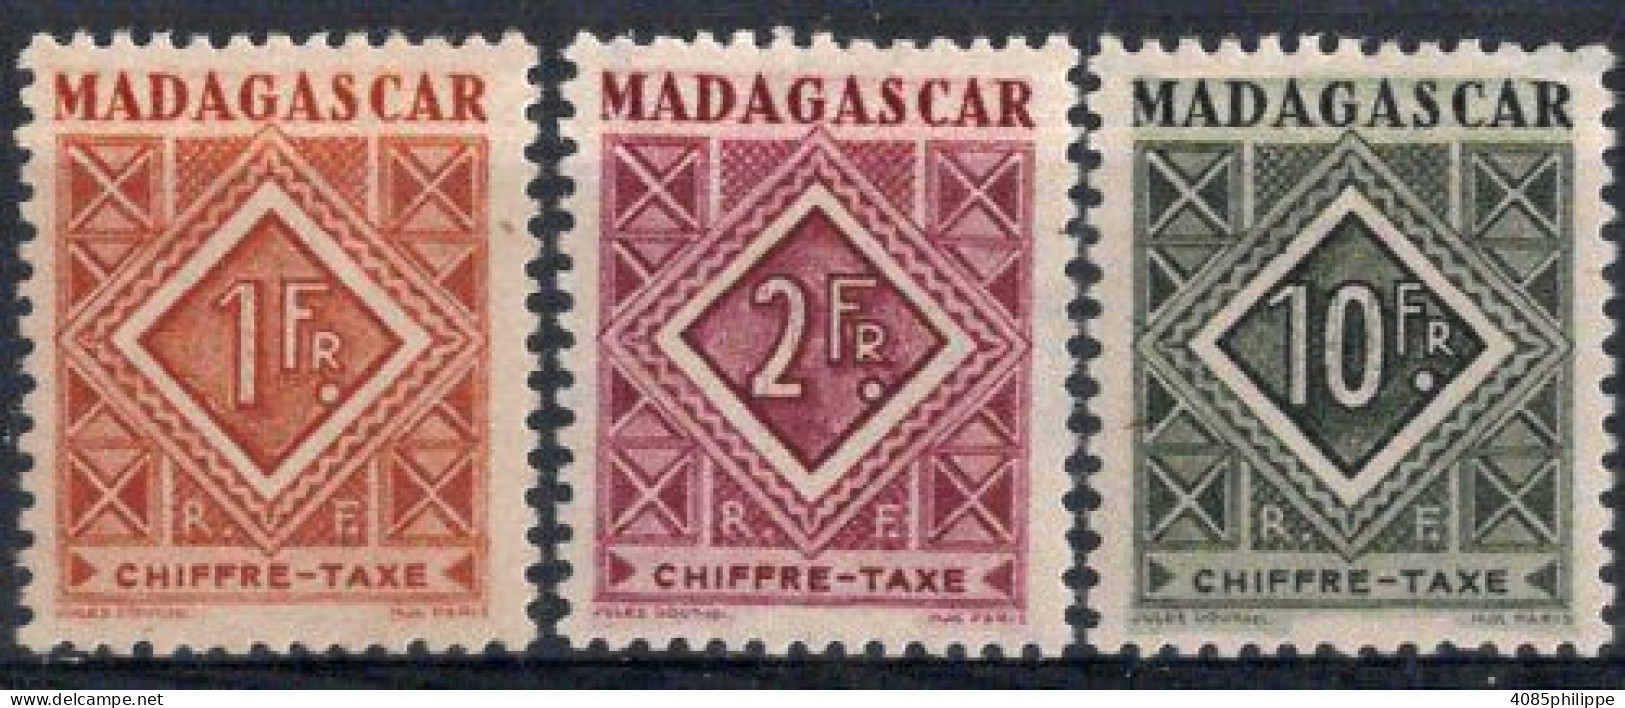 MADAGASCAR Timbres-Taxe N°34*,35* & 39* Neufs Charnières TB  cote : 2€50 - Postage Due